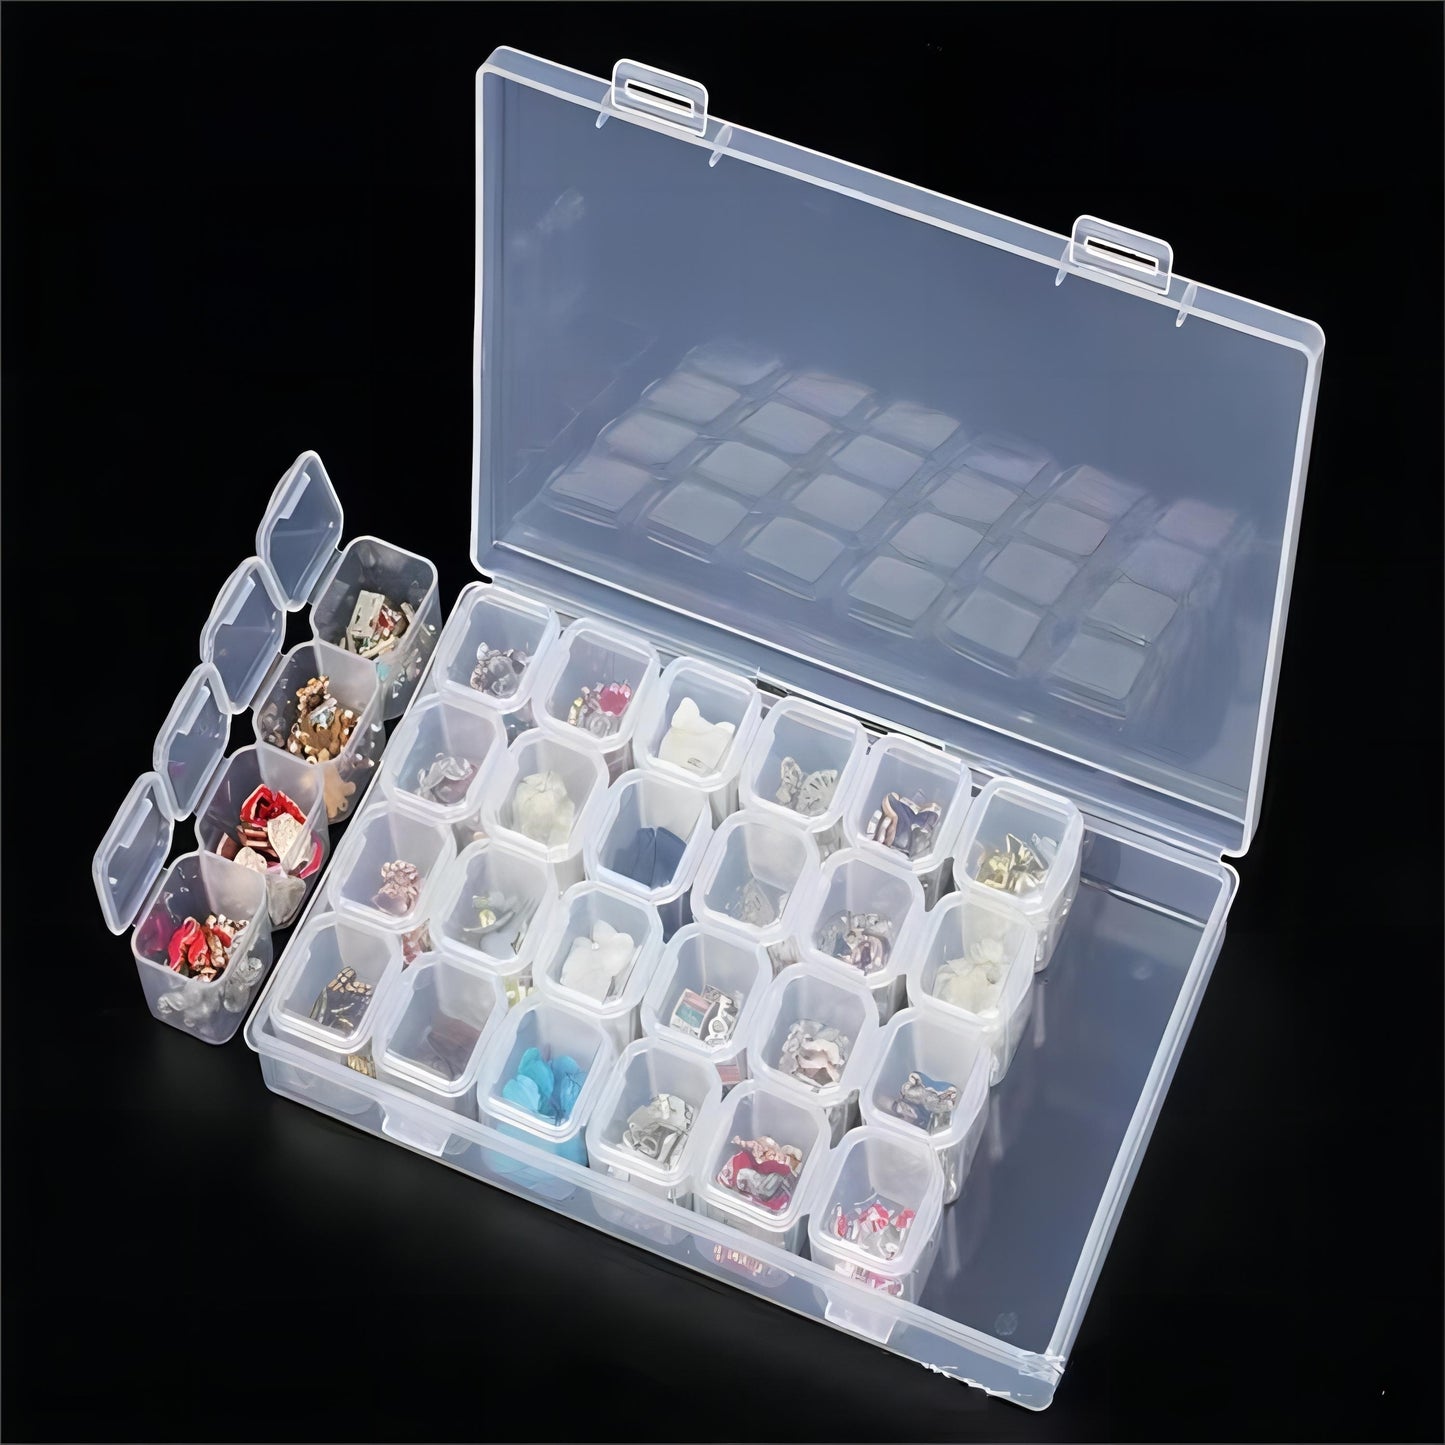 28 Grids Jewelry Organizer 1pc, Plastic Storage Container For Jewelry Ring Earring Studs Necklace, Diamond Rhinestone Beads Storage Boxes